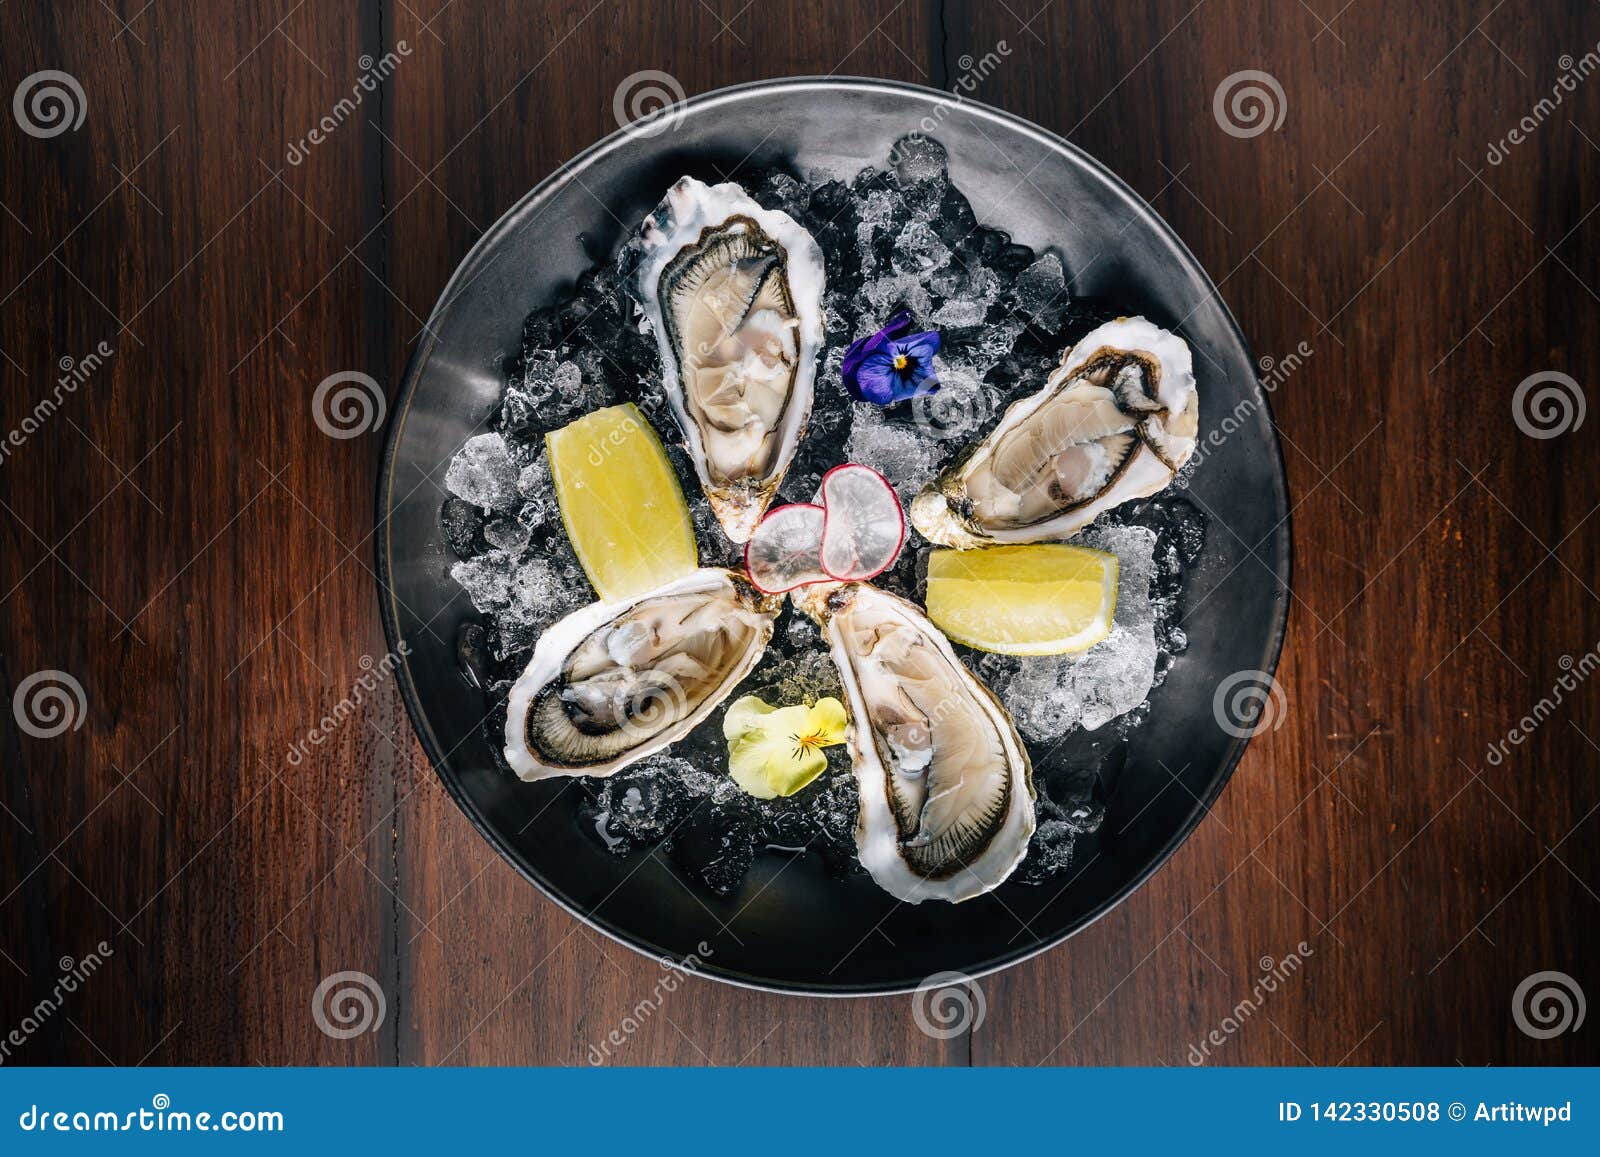 top view of fine de claire oyster and lemon served in black bowl with ice on wooden table